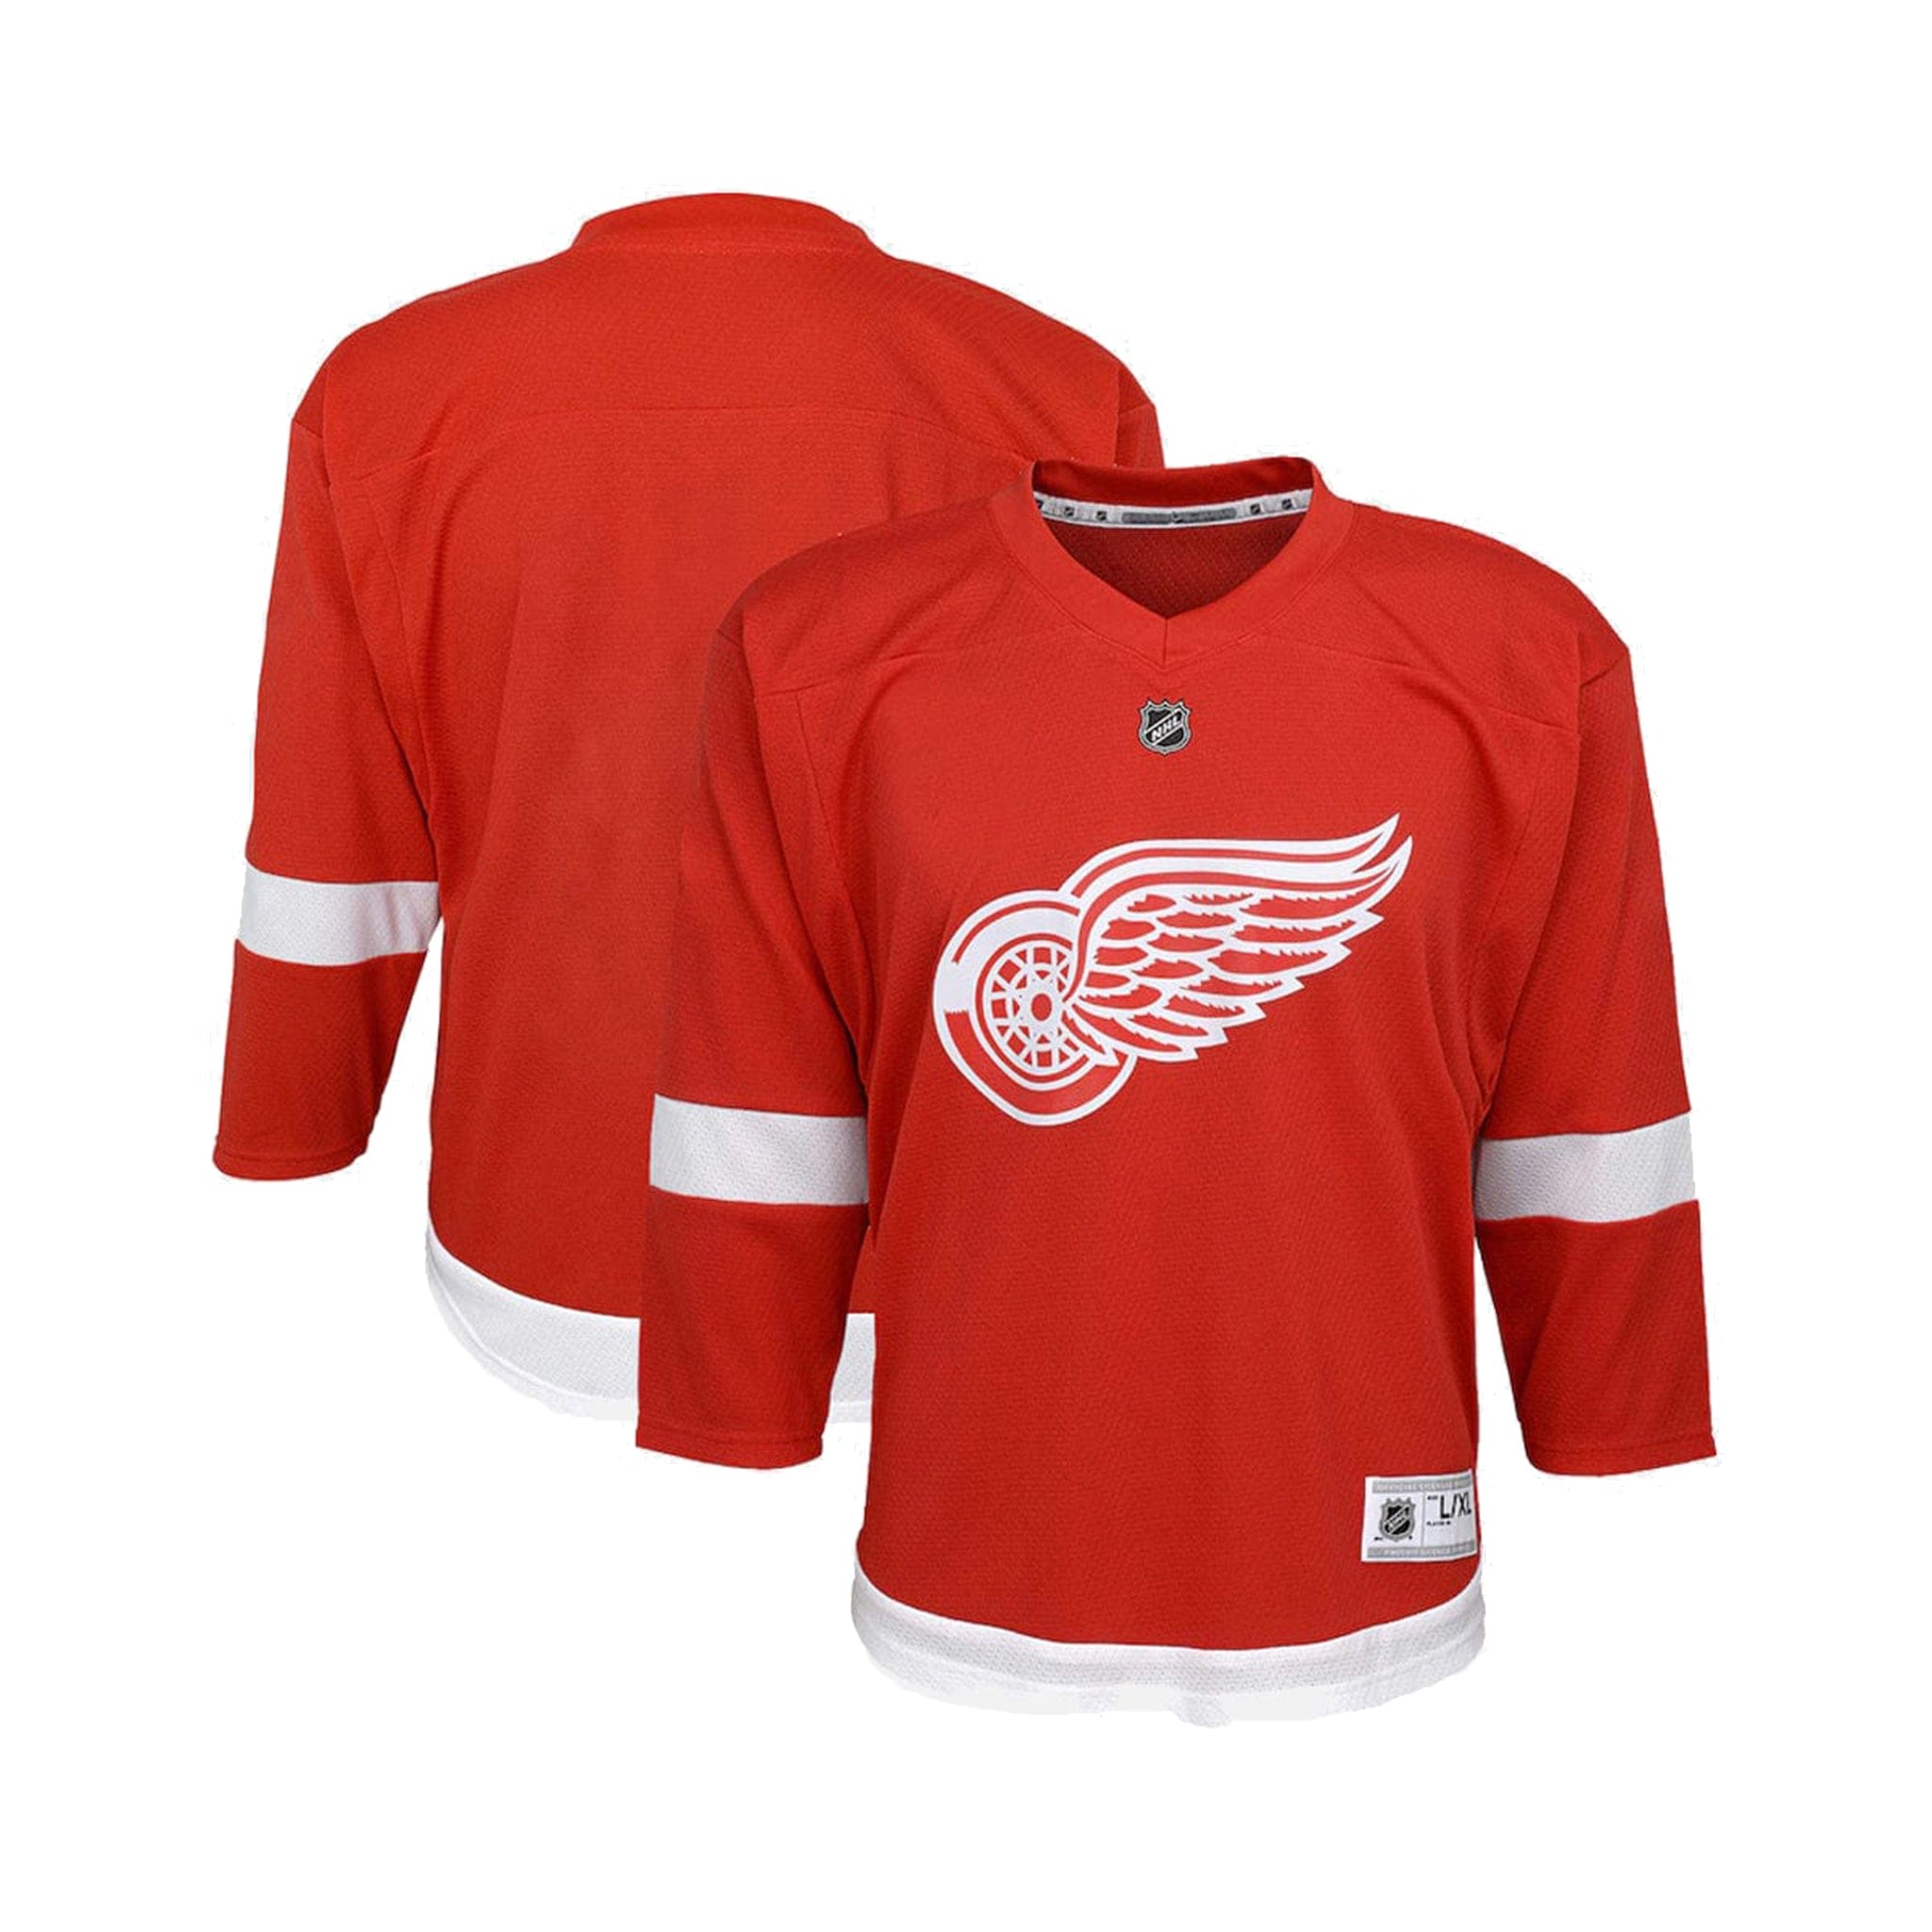 Youth Detroit Red Wings Red Home Replica Blank Jersey